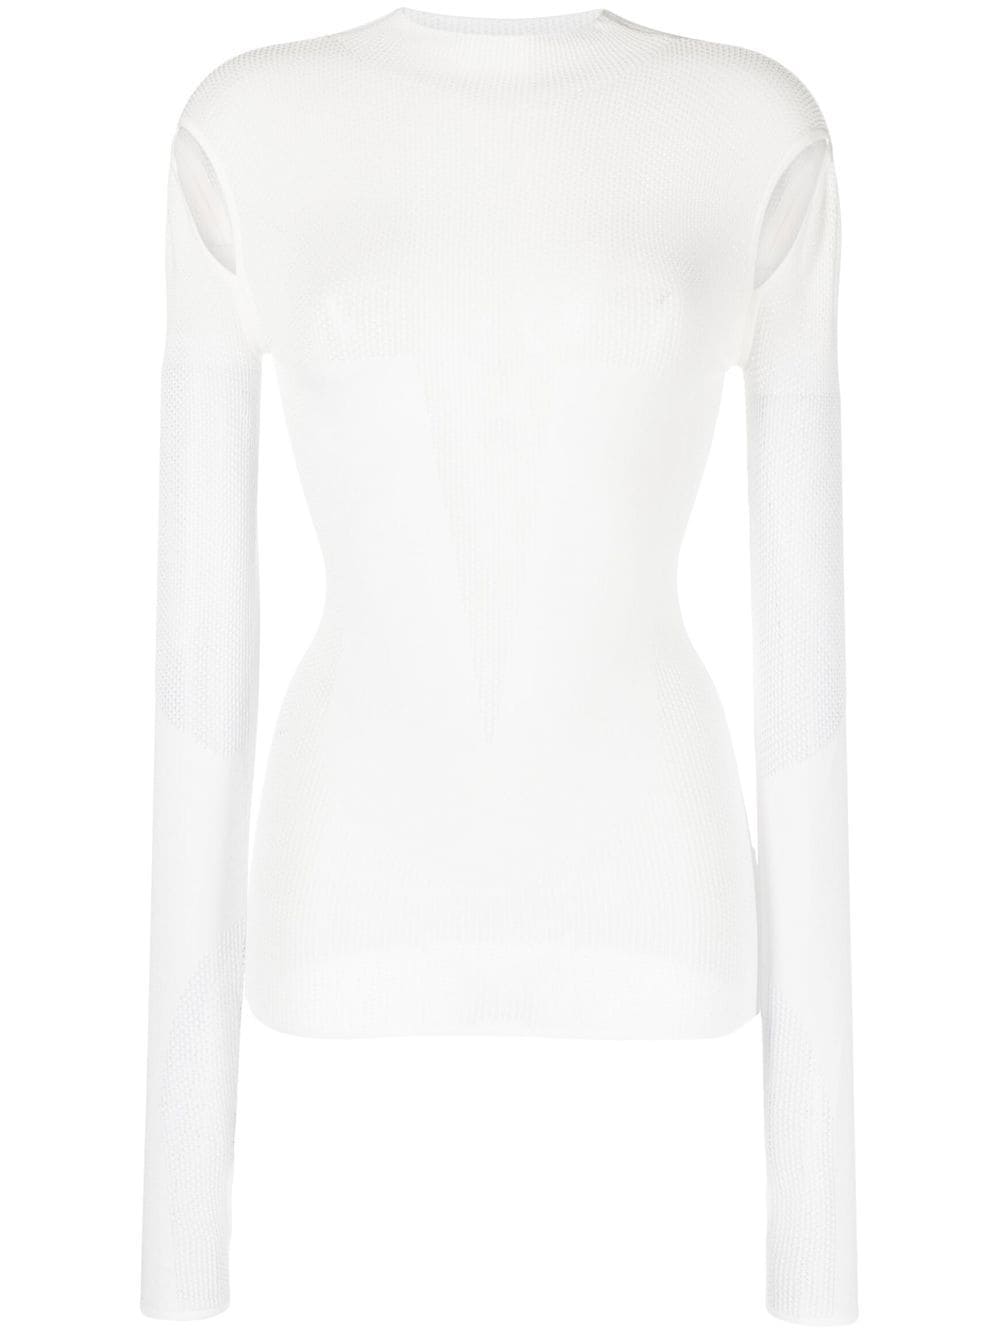 Dion Lee cut-out detail mesh top - White